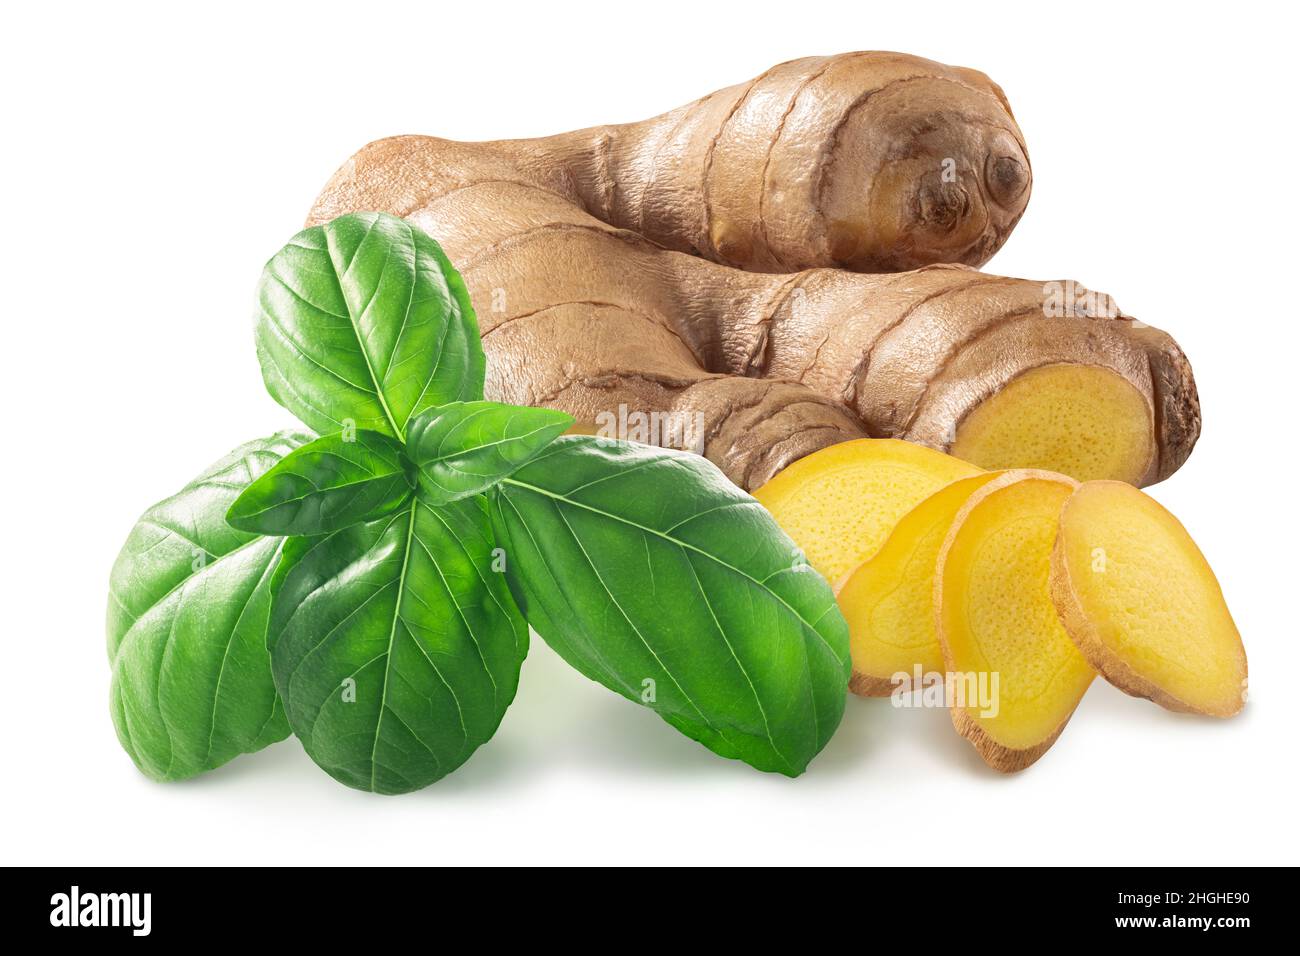 Ginger root with fresh basil leaves, isolated Stock Photo